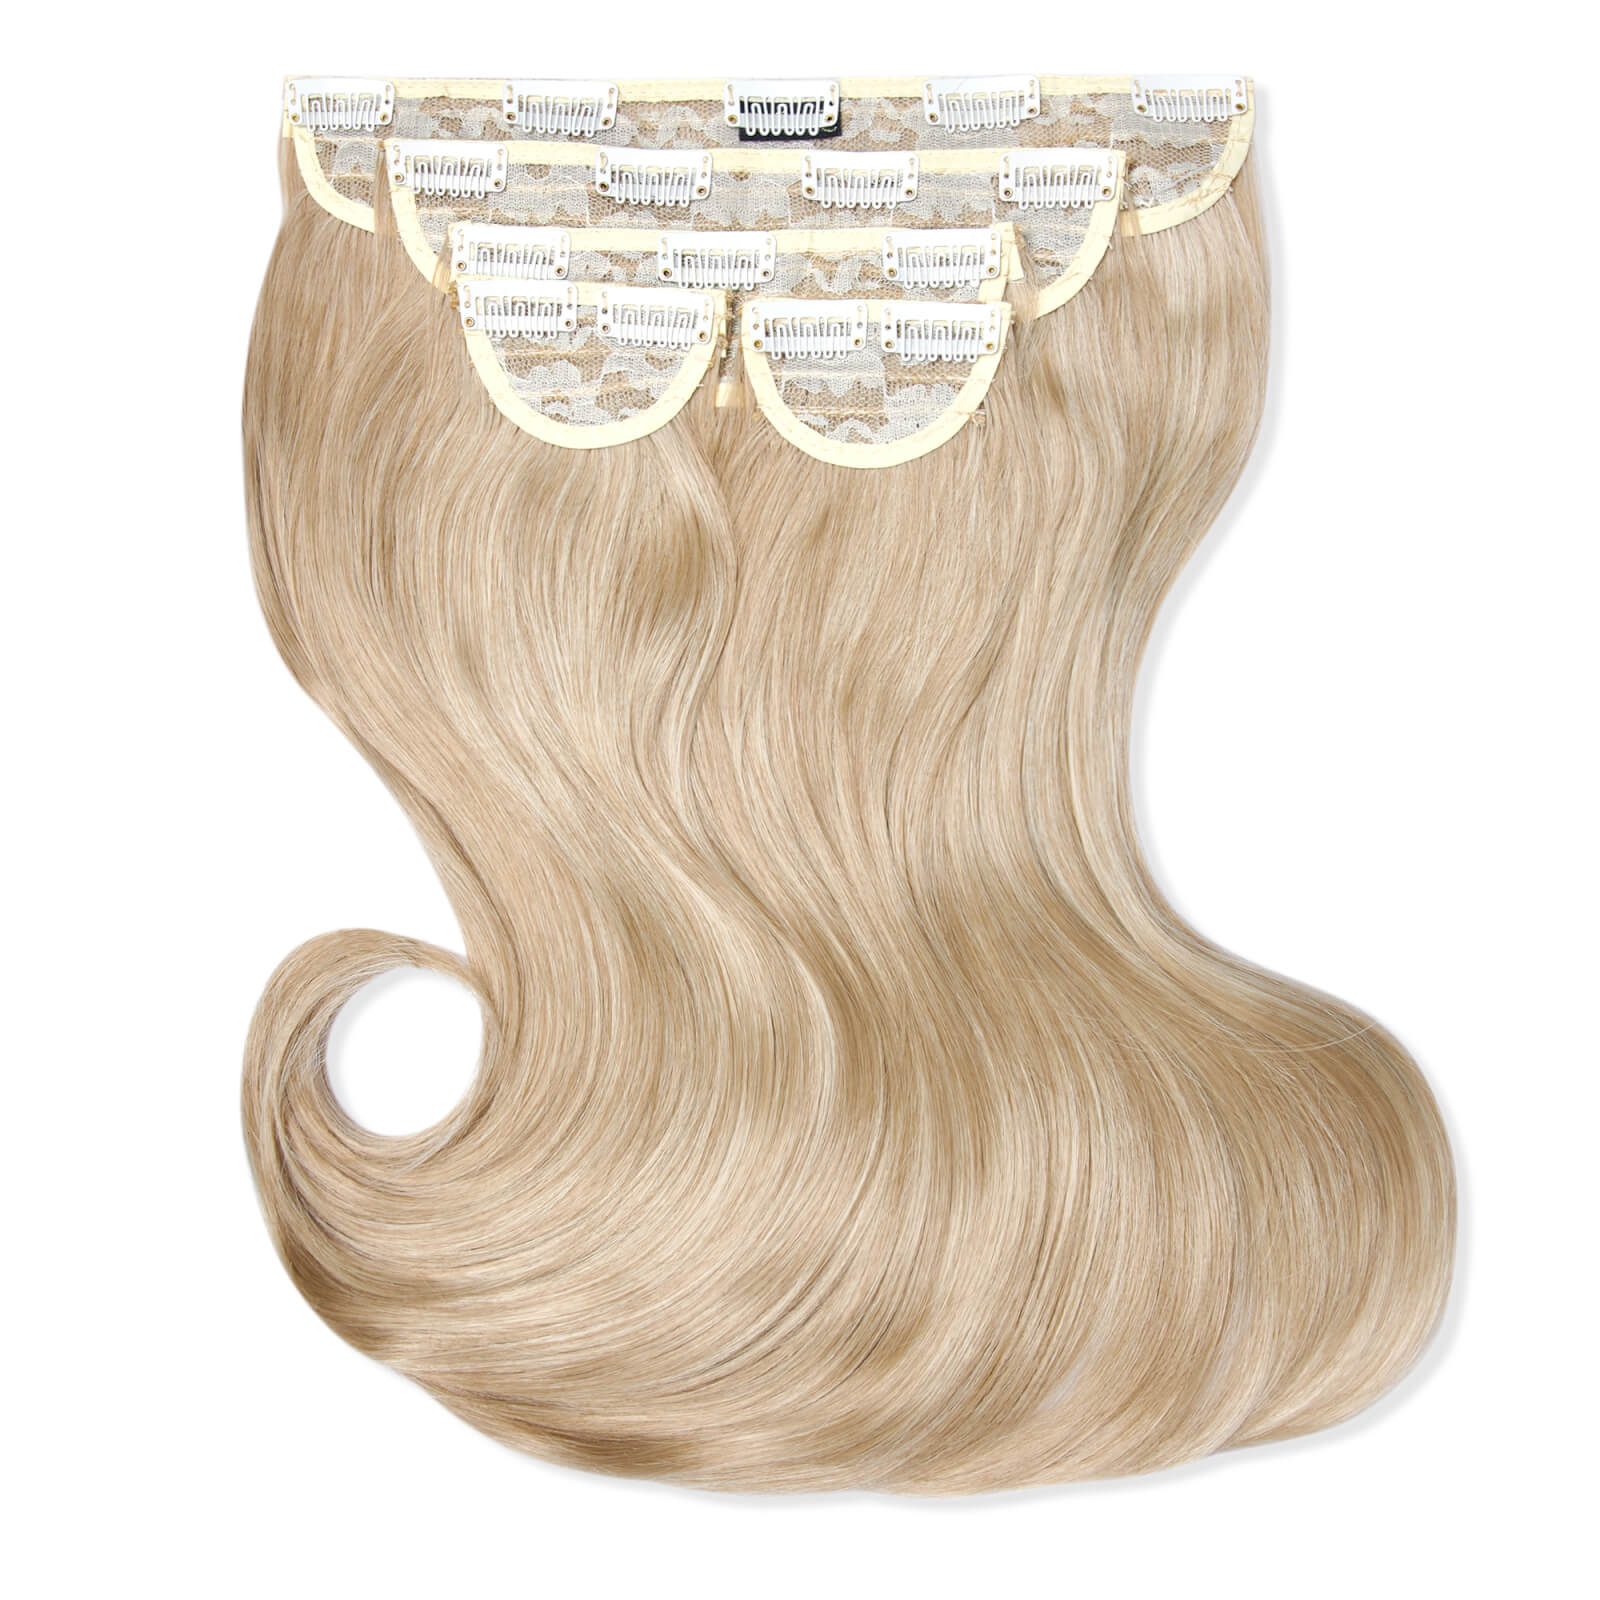 LullaBellz Super Thick 16 5 Piece Blow Dry Wavy Clip In Extensions (Various Shades) - California Blonde - Mellow Brown